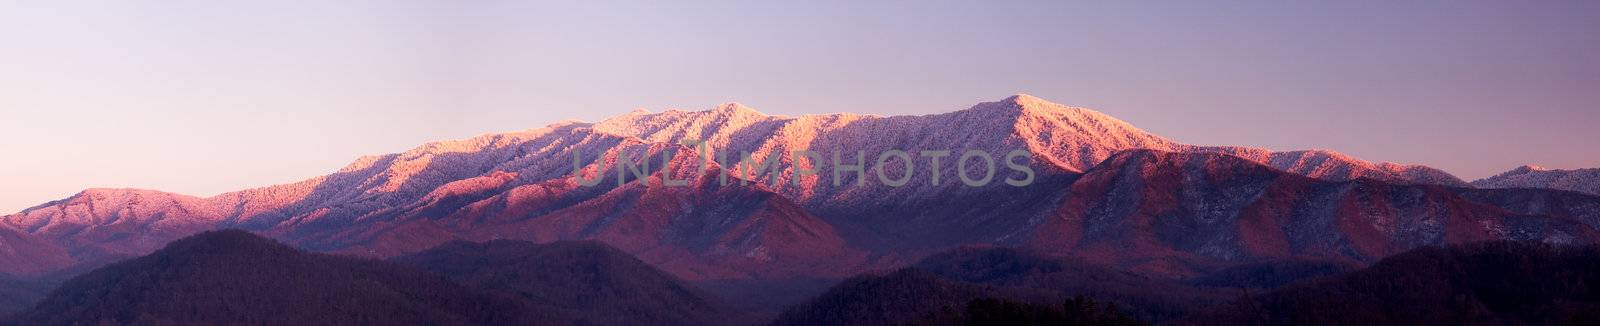 Sun setting on Smoky Mountains by steheap